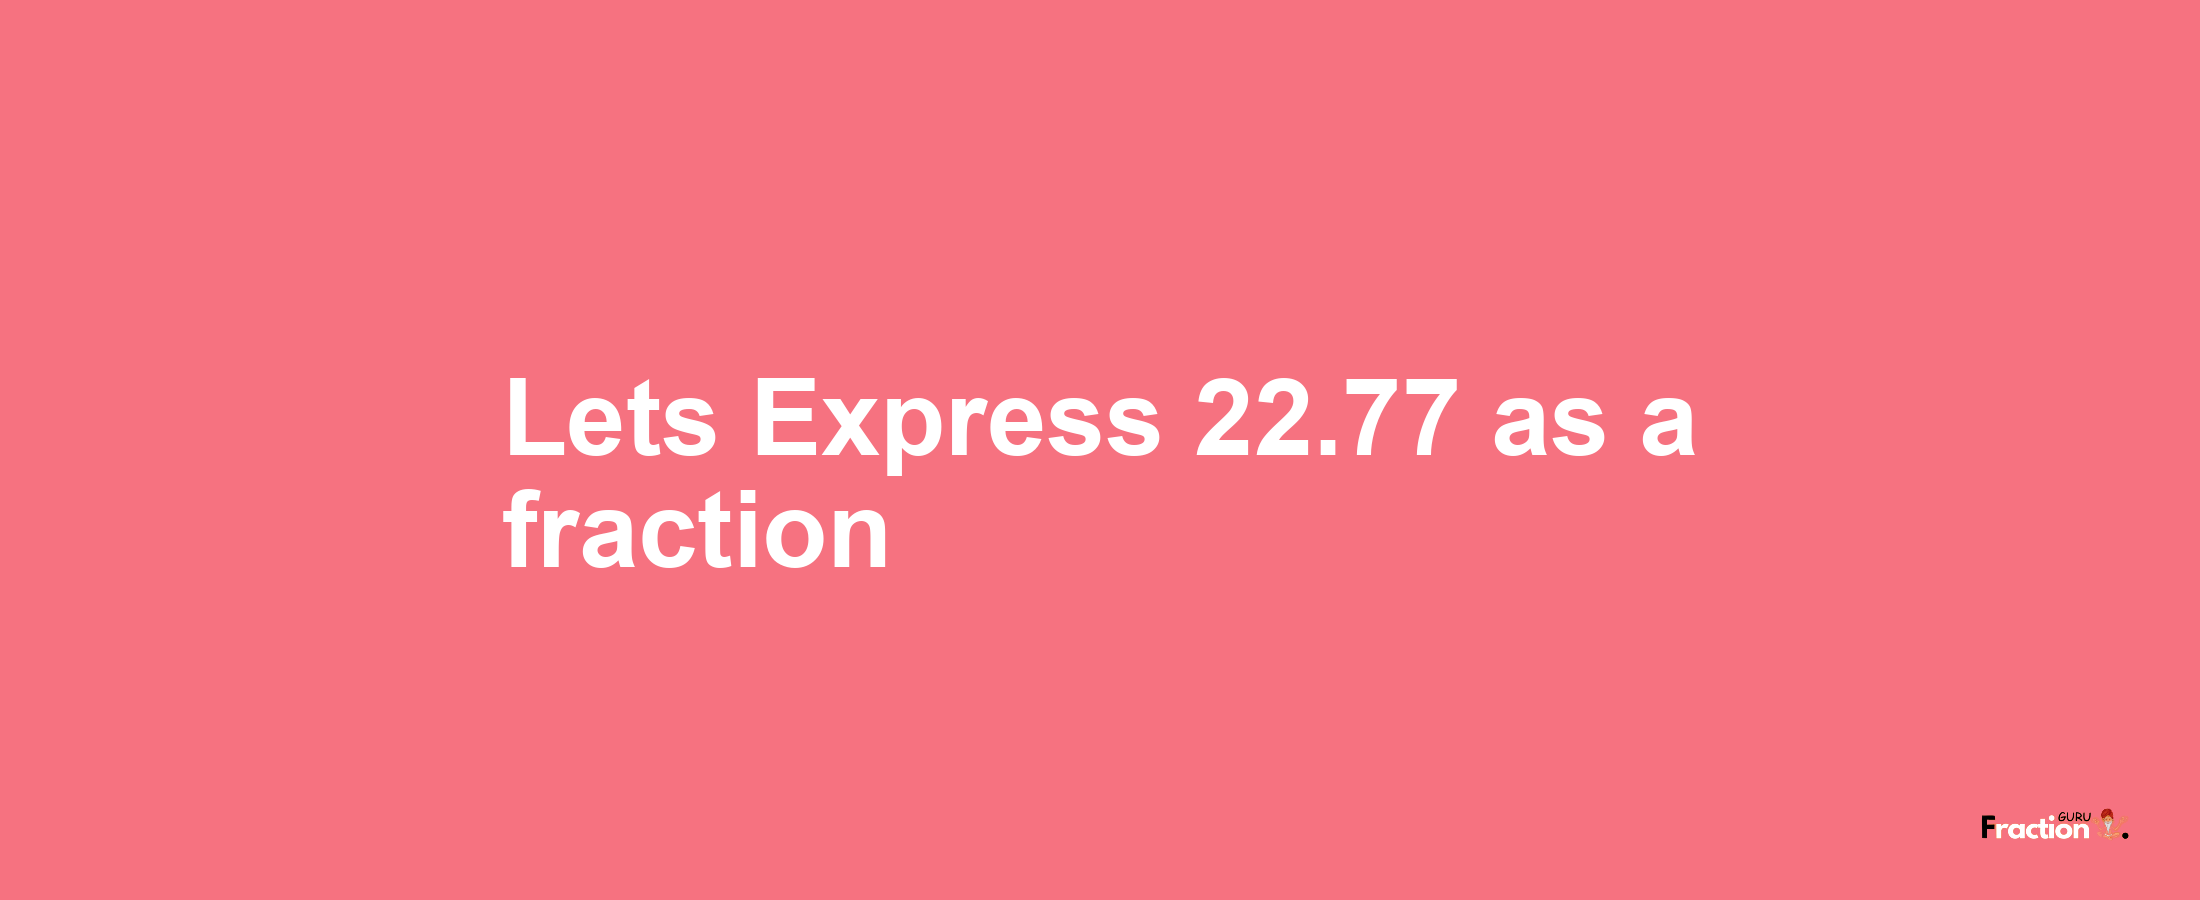 Lets Express 22.77 as afraction